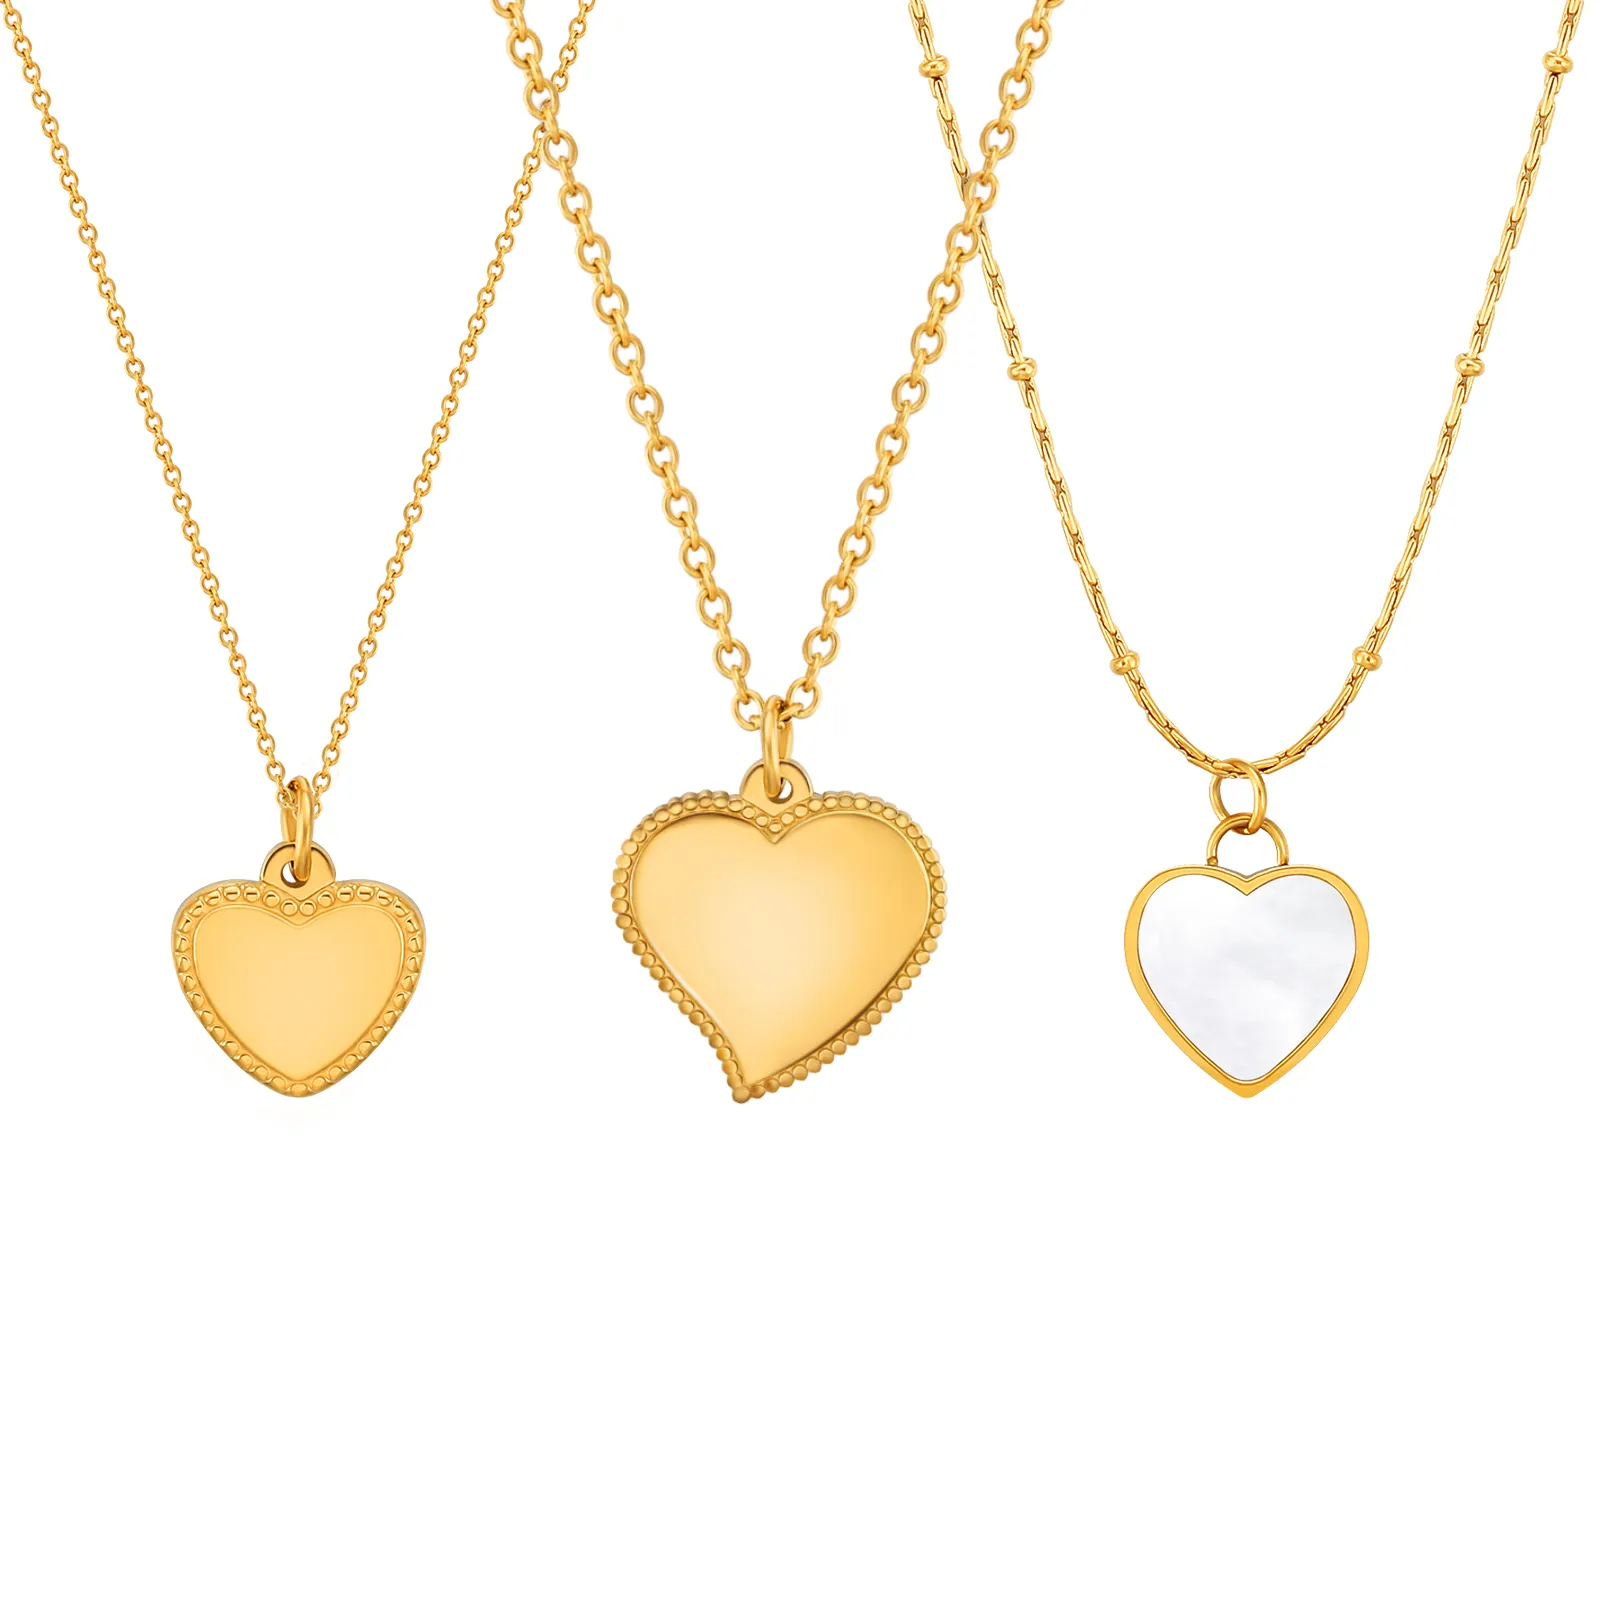 KRKC 1MM Adjustable Cable Chain PVD 18K Real Gold Plated 316L Stainless Steel Heart Pendant Mother of Pearl Necklaces for Women